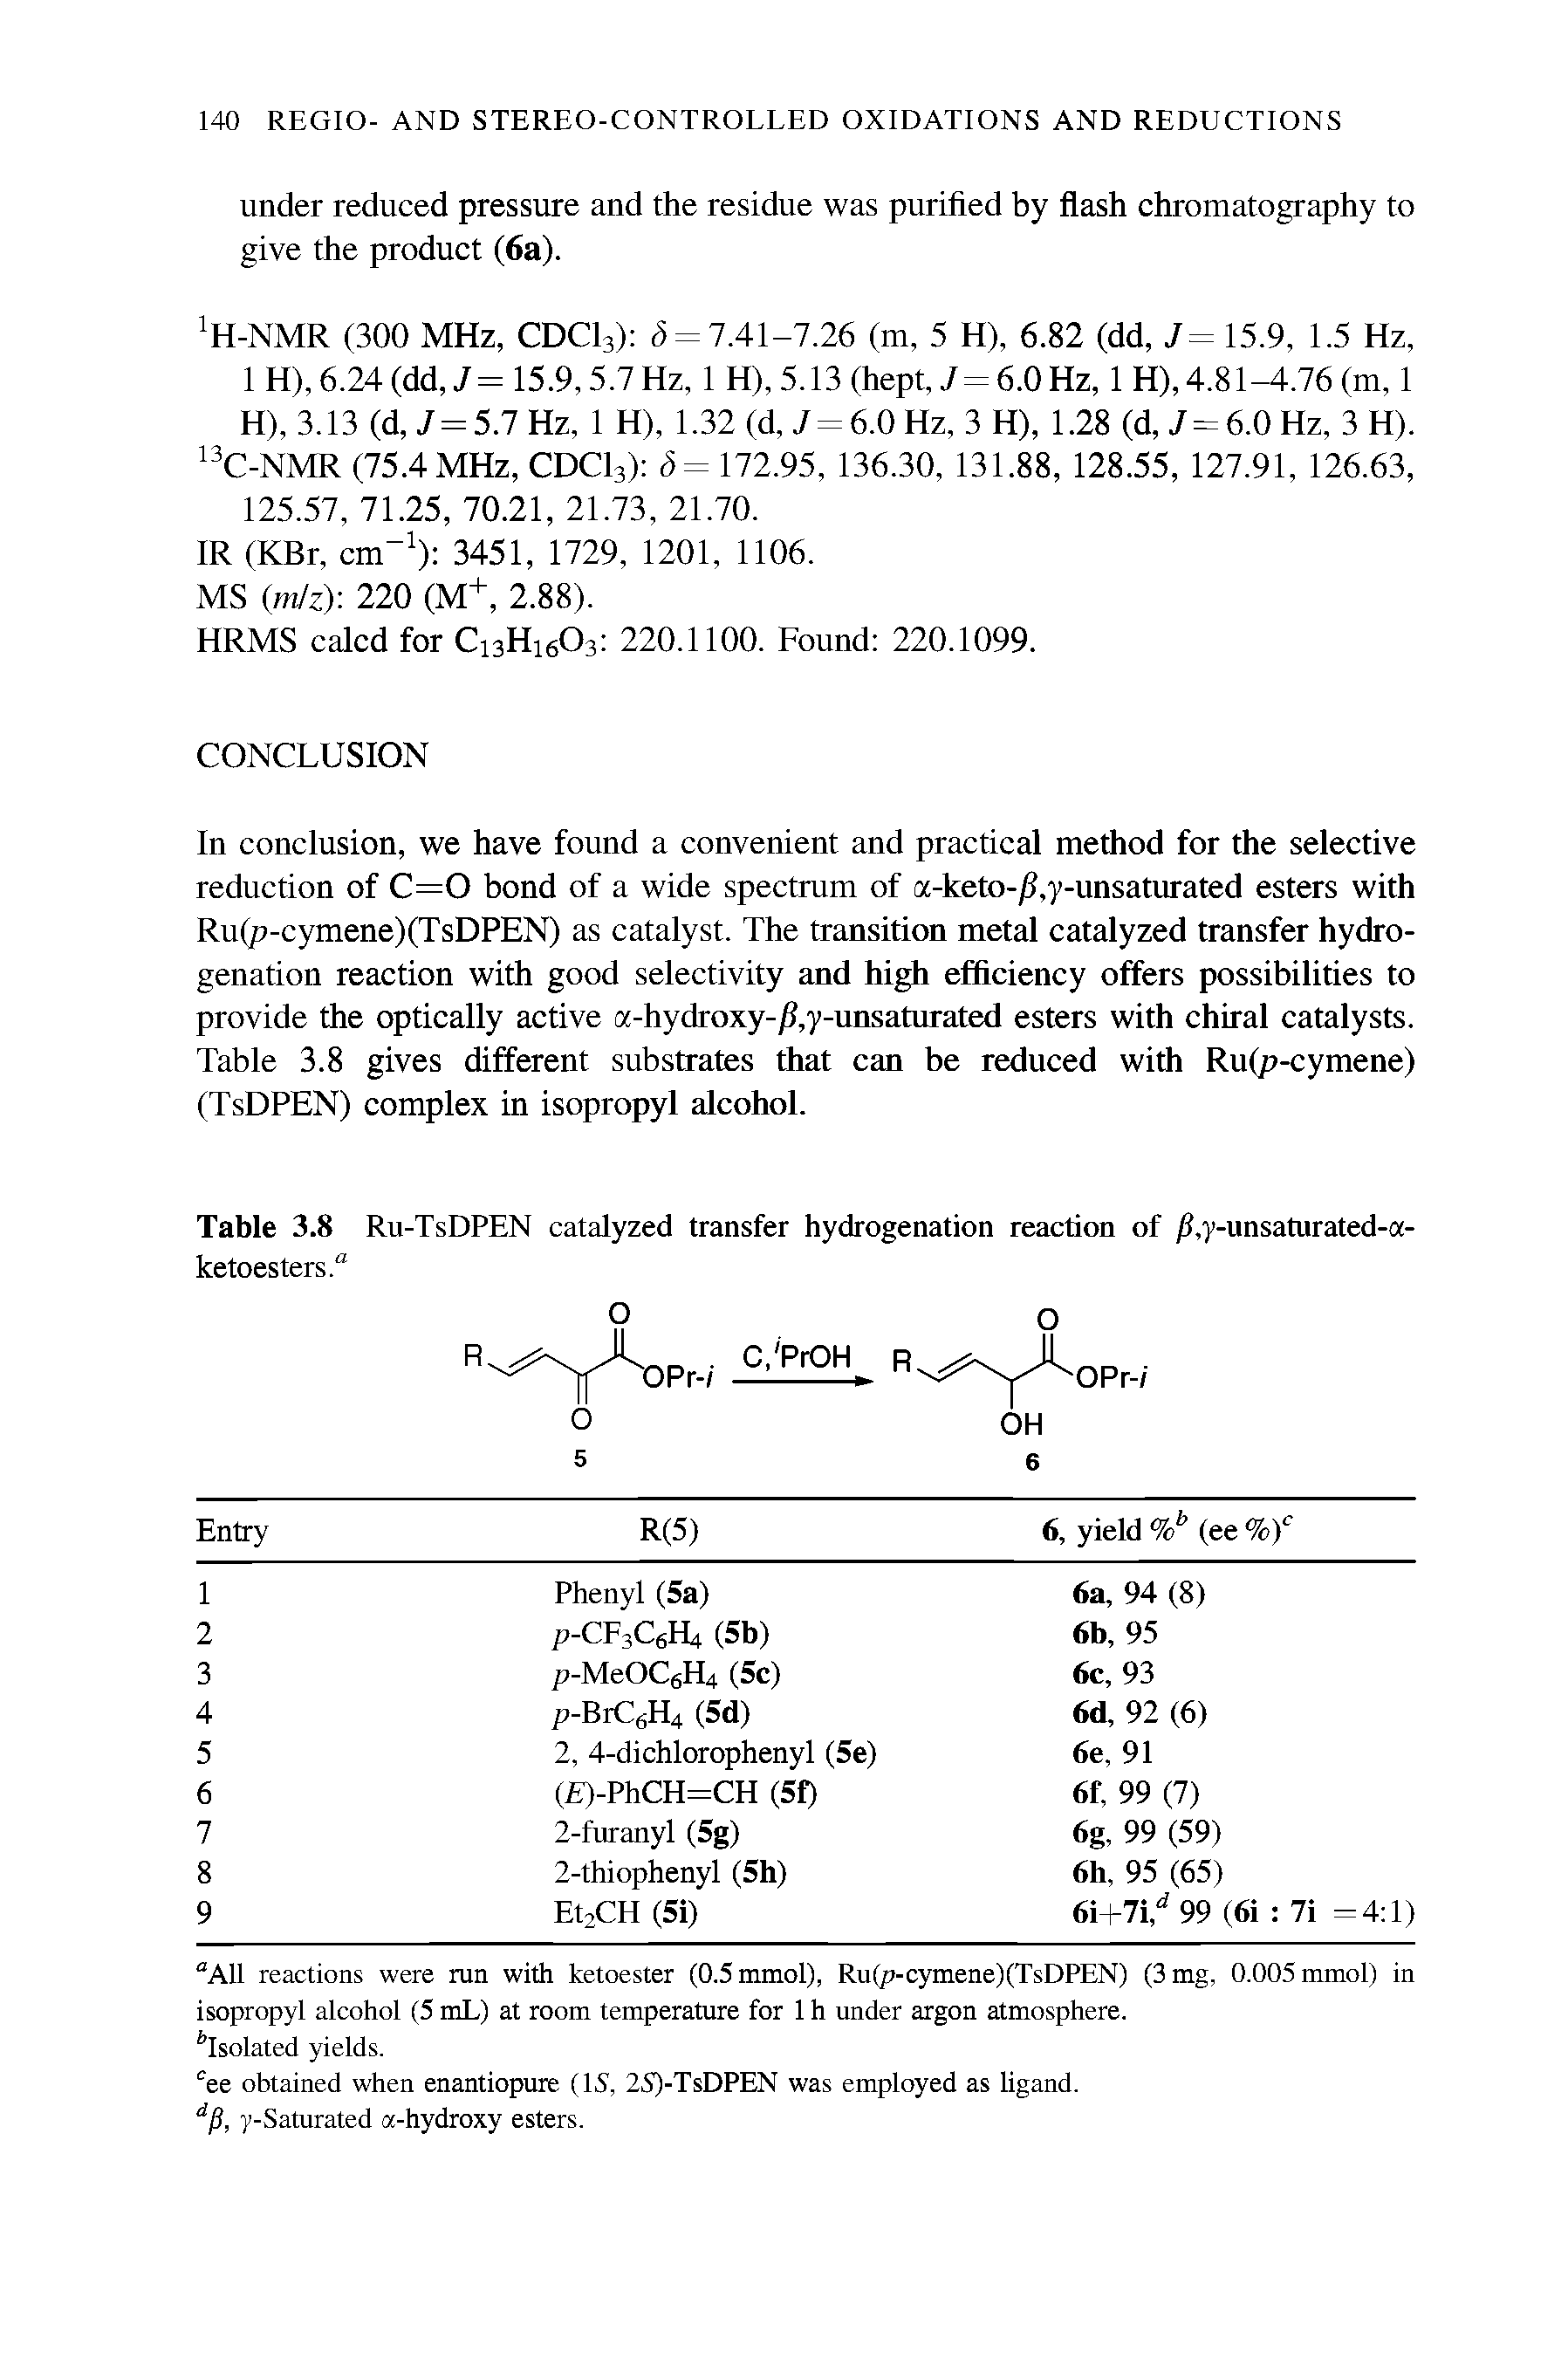 Table 3.8 Ru-TsDPEN catalyzed transfer hydrogenation reaction of /i,y-unsaturated-a- ...